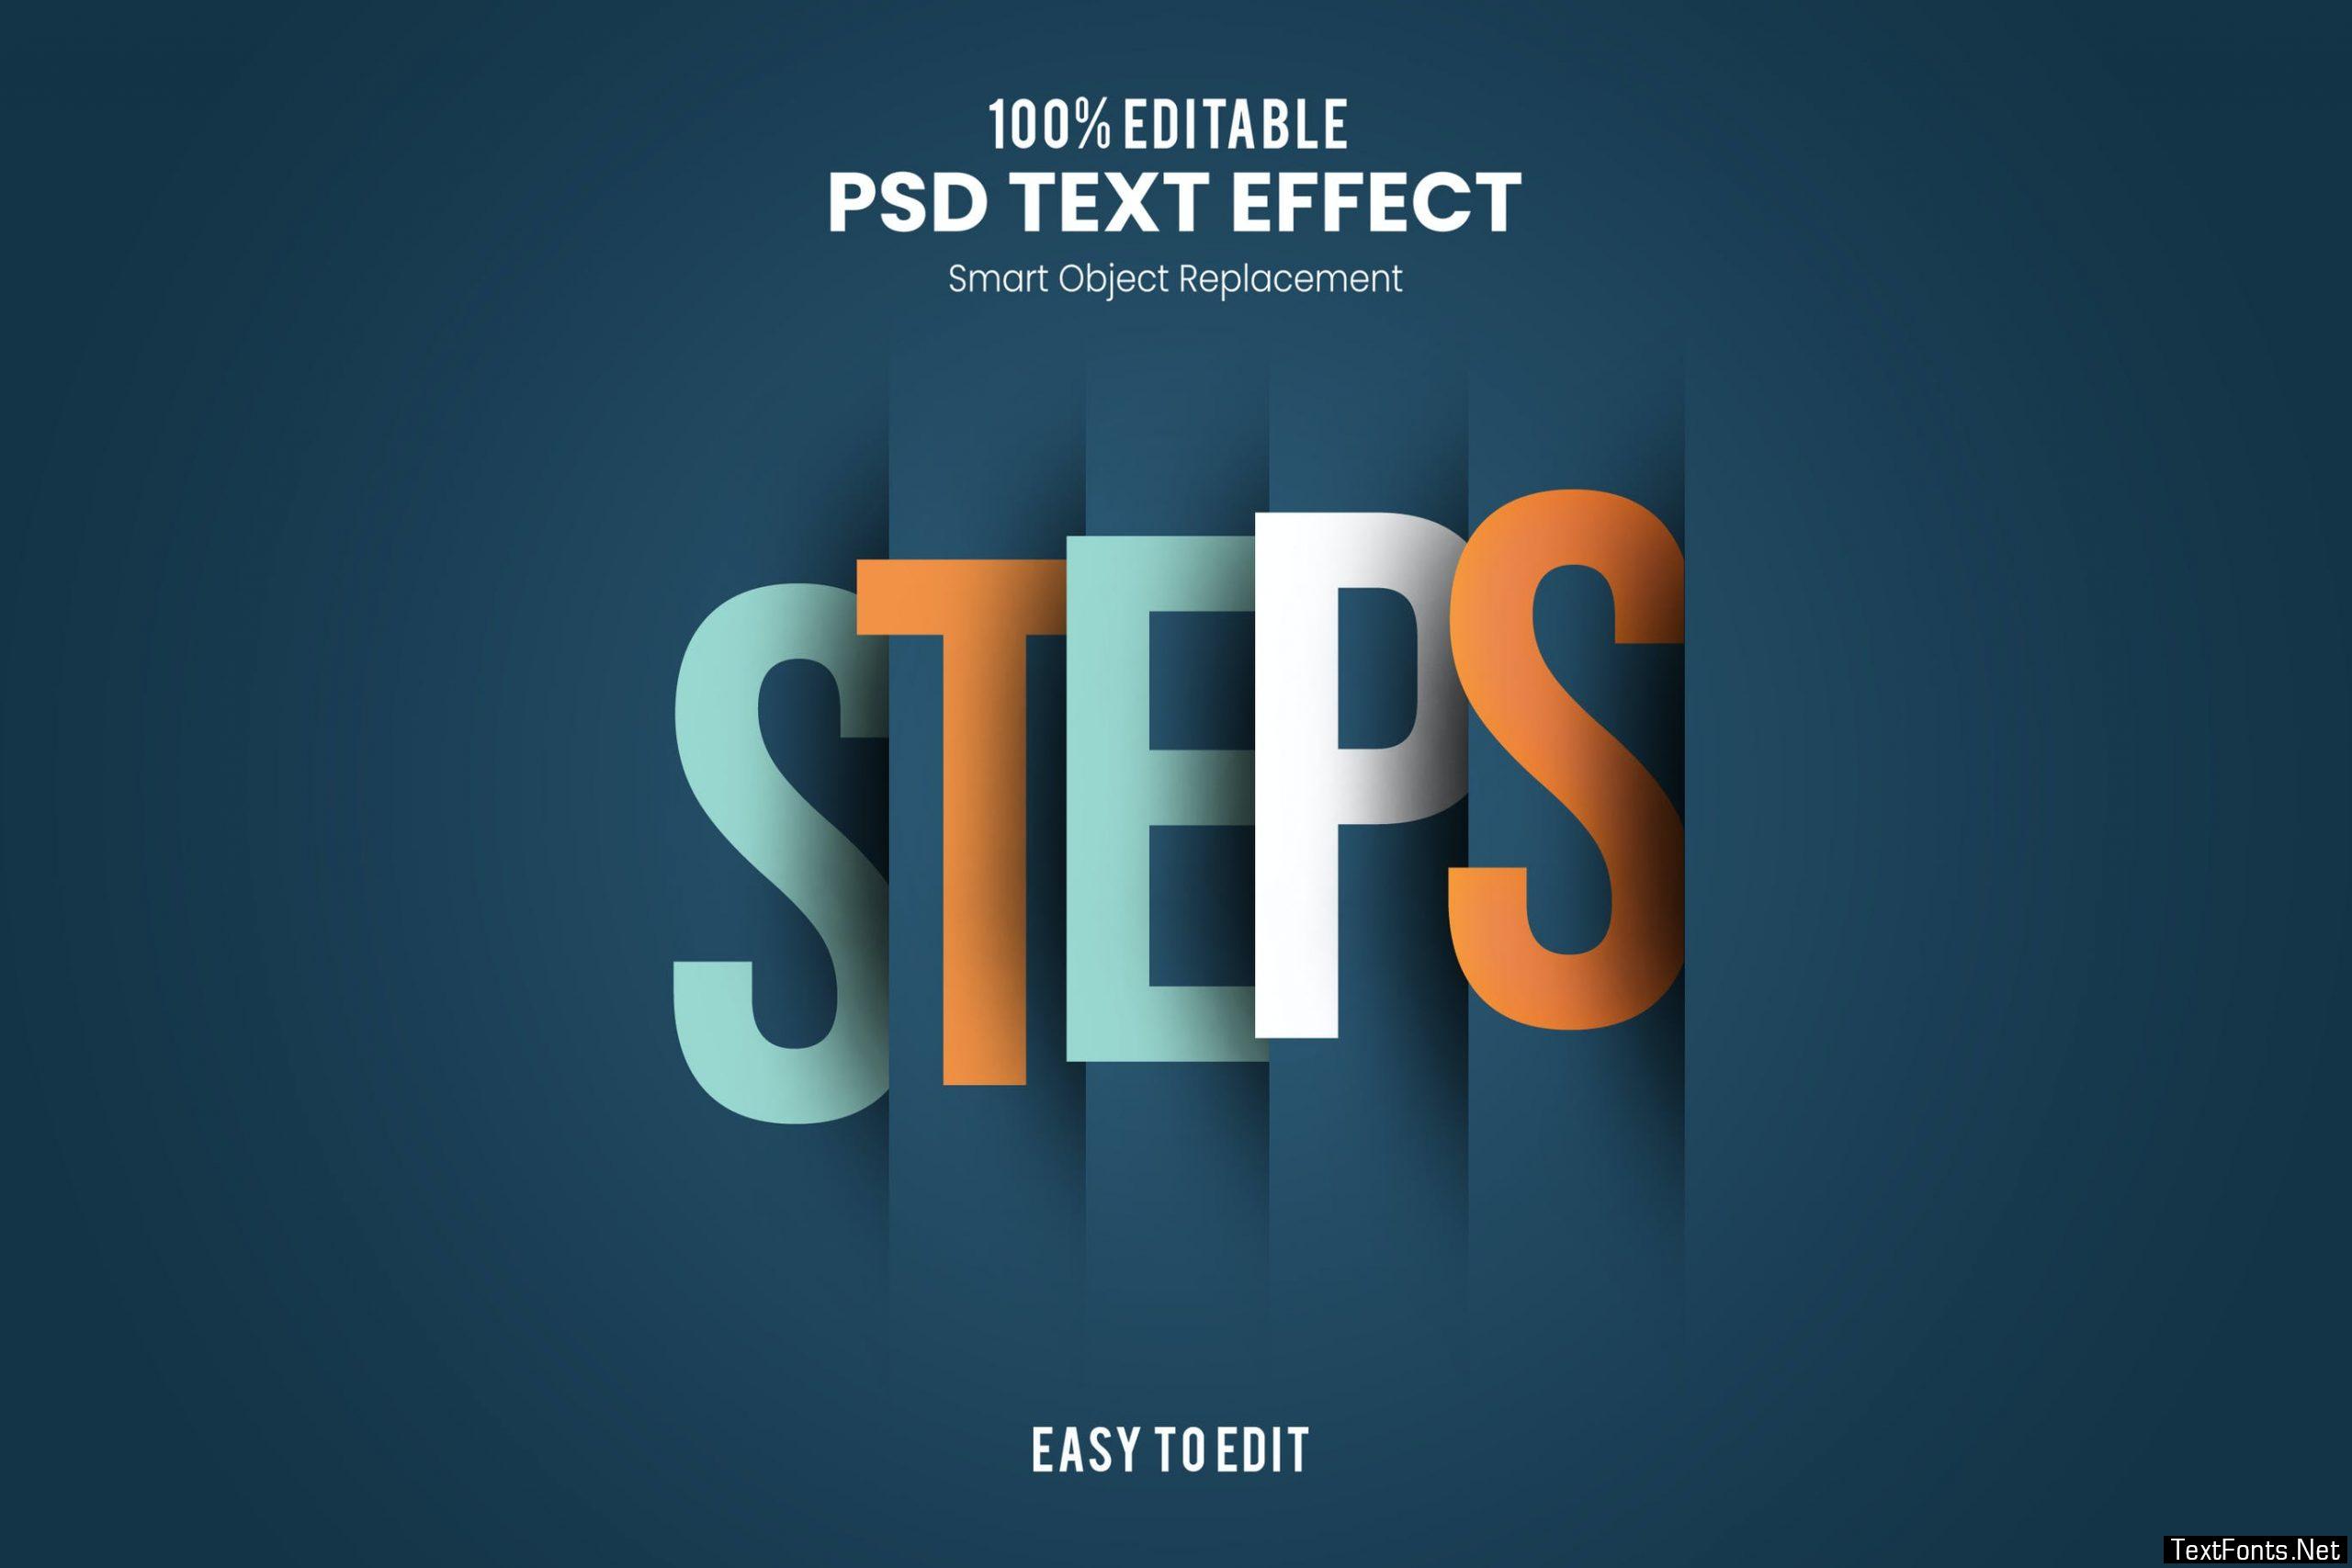 Steps-Text Effect